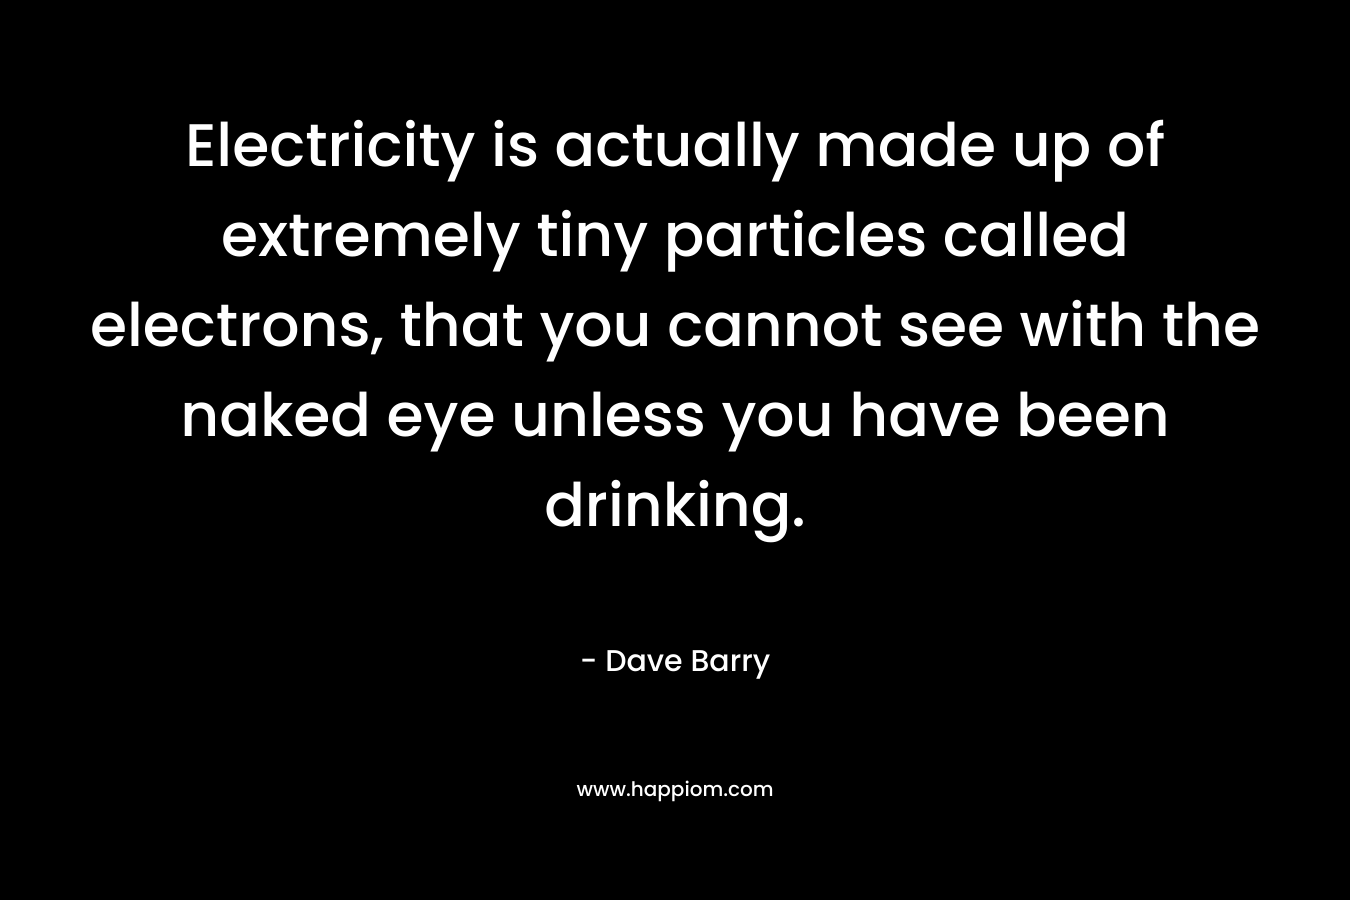 Electricity is actually made up of extremely tiny particles called electrons, that you cannot see with the naked eye unless you have been drinking. – Dave Barry